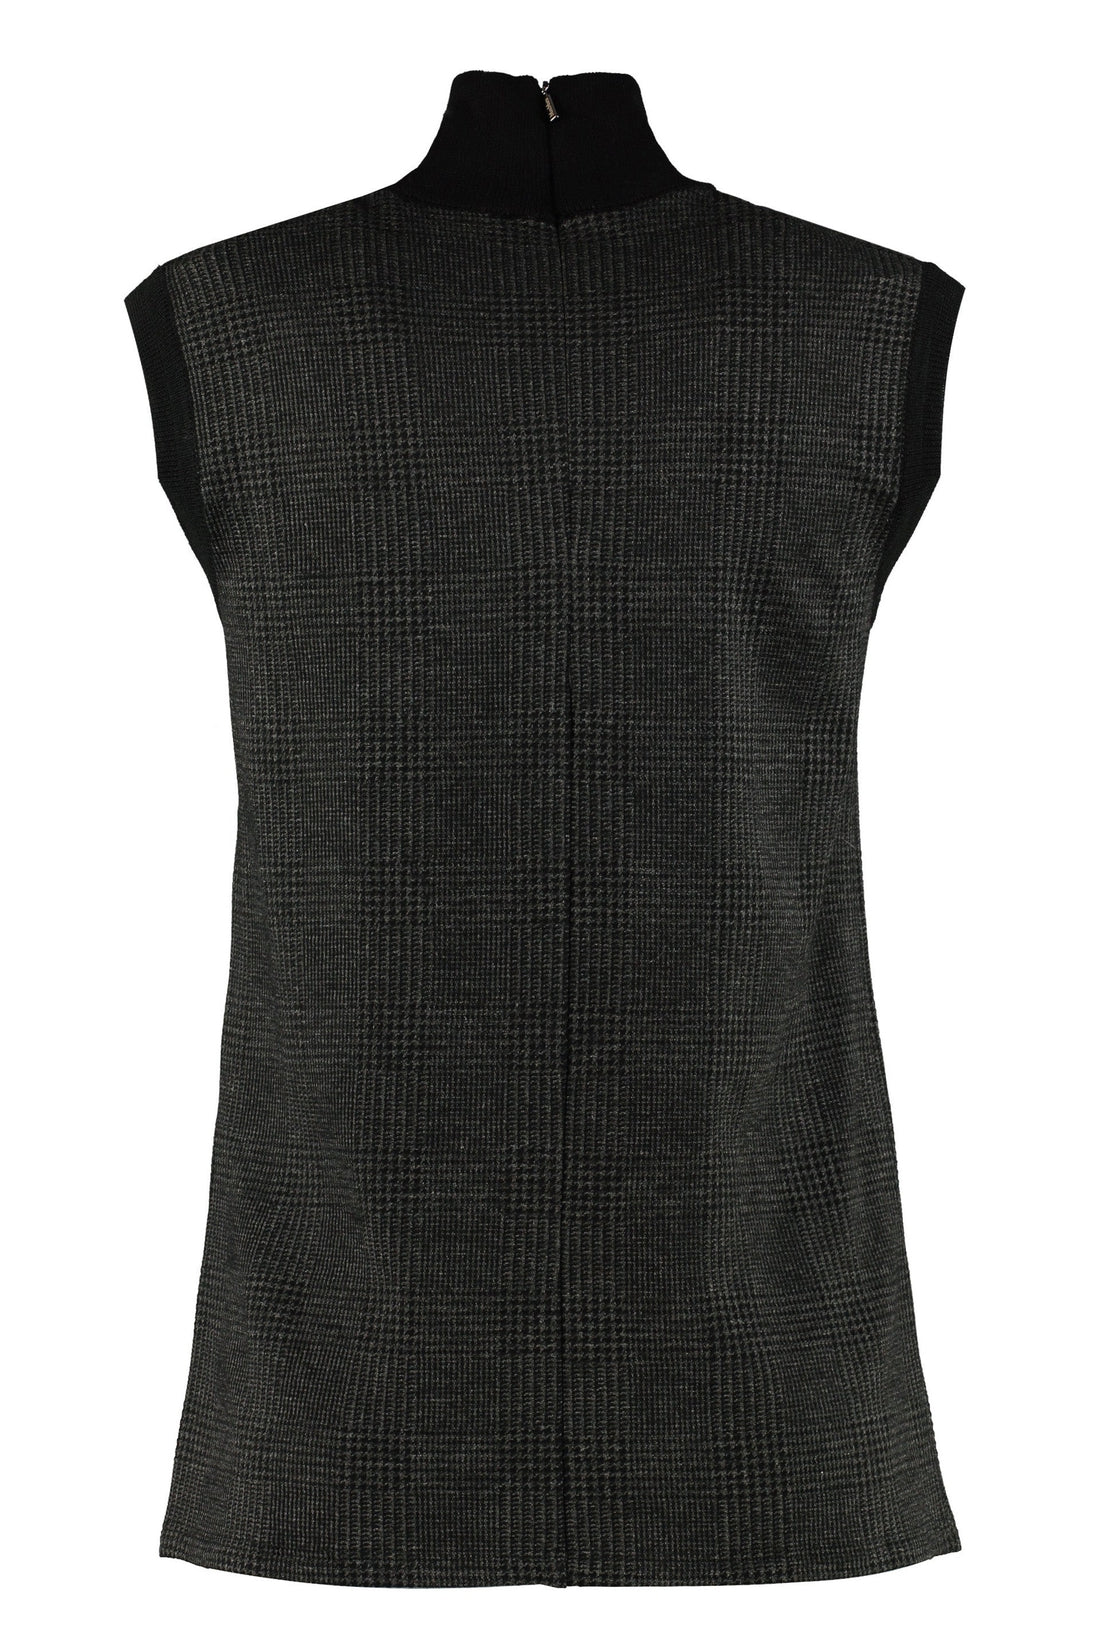 Max Mara-OUTLET-SALE-Abate knitted top-ARCHIVIST